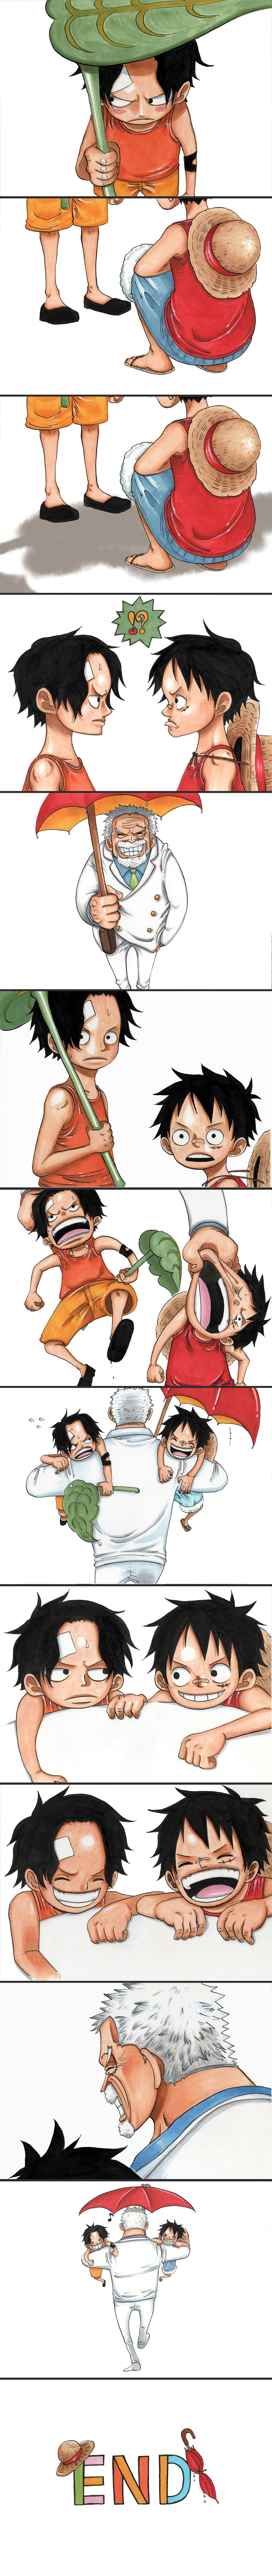 3boys absurdres brother brothers carry carrying child comic east_blue family freckles grandfather highres incredibly_absurdres leaf long_image male male_focus monkey_d_garp monkey_d_luffy multiple_boys one_piece portgas_d_ace red_shirt shirt shueisha siblings strip tall_image umbrella undressing water young younger